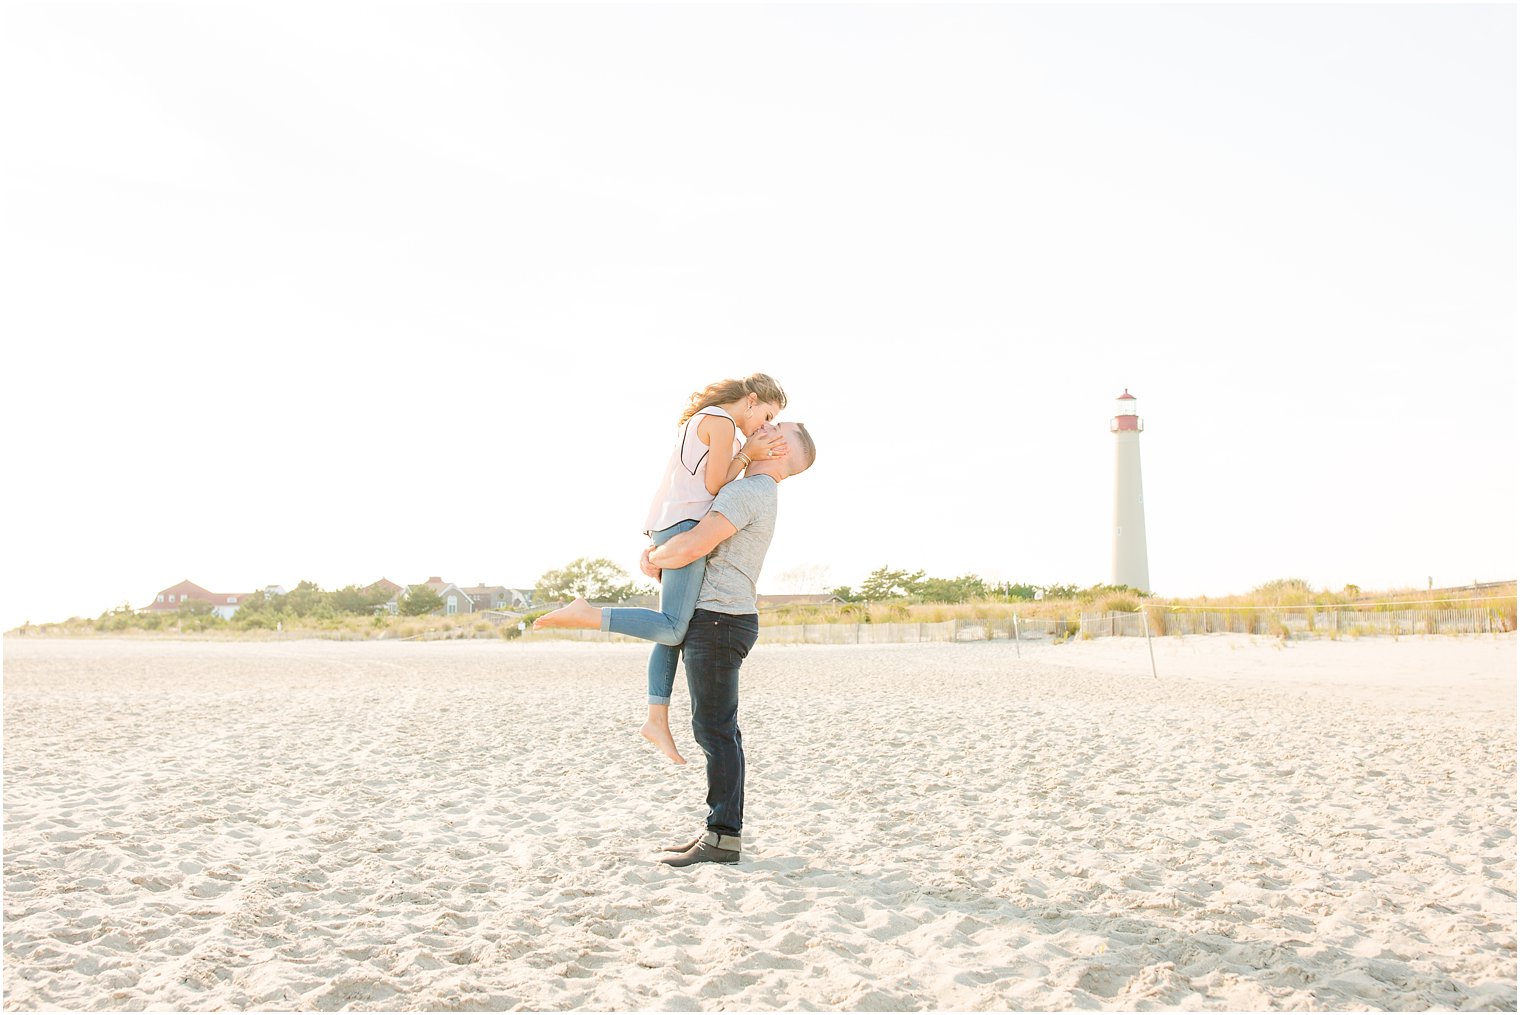 Groom lifts bride during engagement session | Photos by Idalia Photography